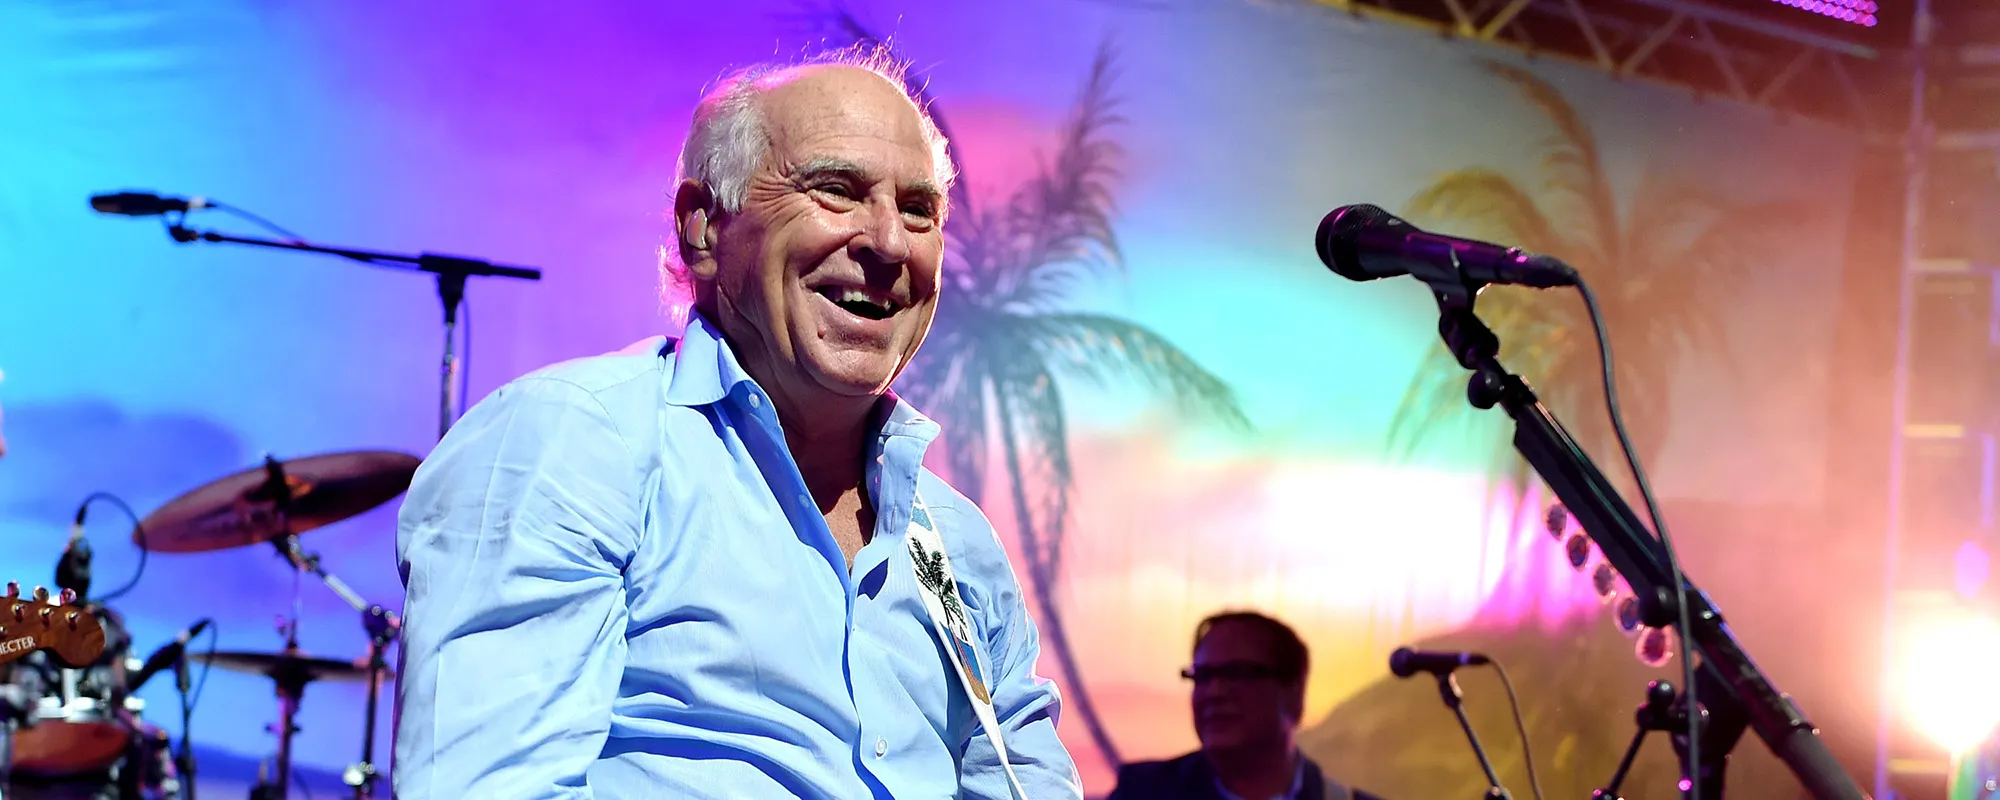 Sway into the Holidays with Jimmy Buffett’s Best Island-Inspired Christmas Songs